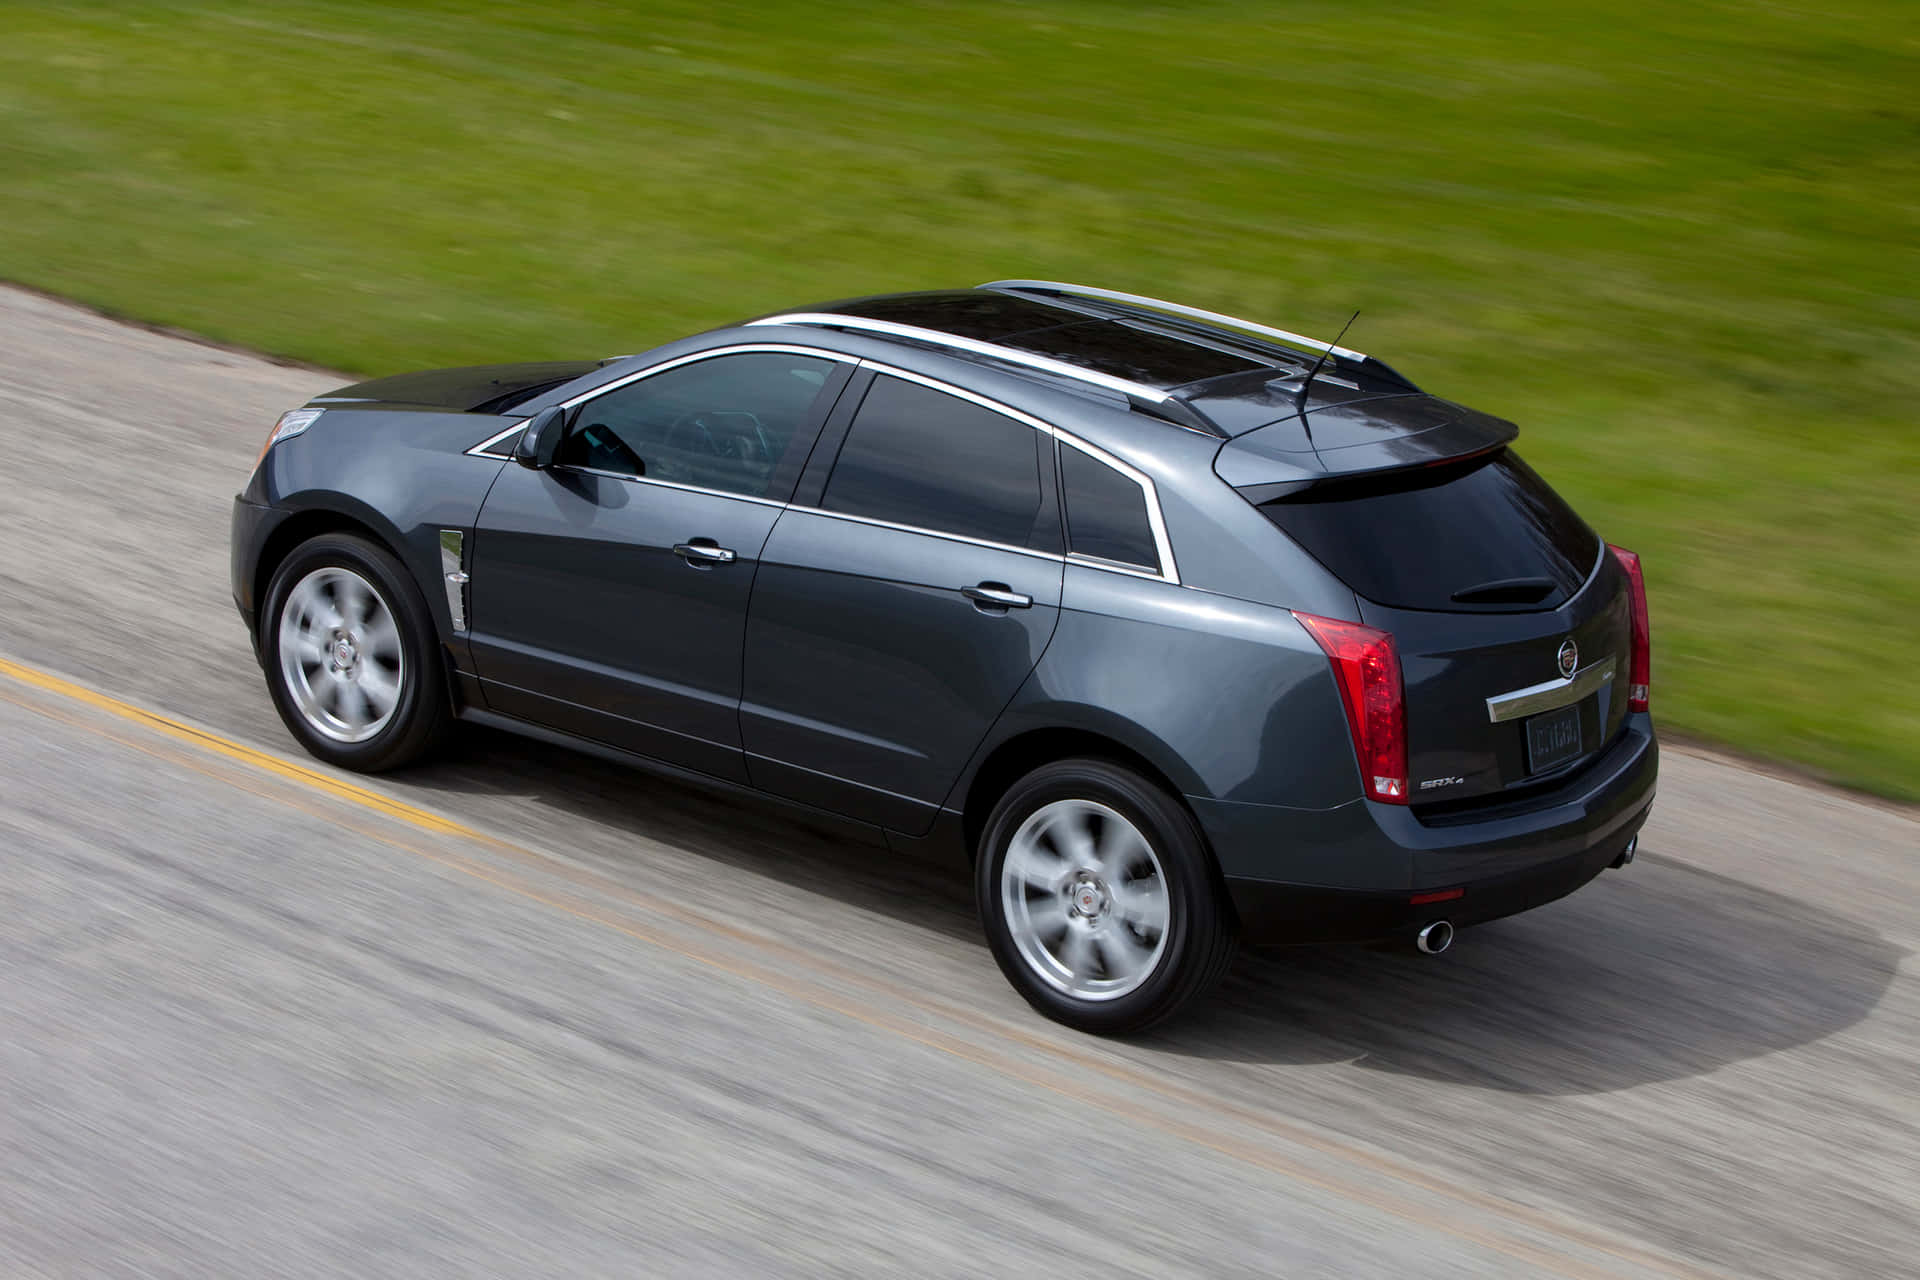 Stunning Cadillac SRX cruising on a picturesque road Wallpaper